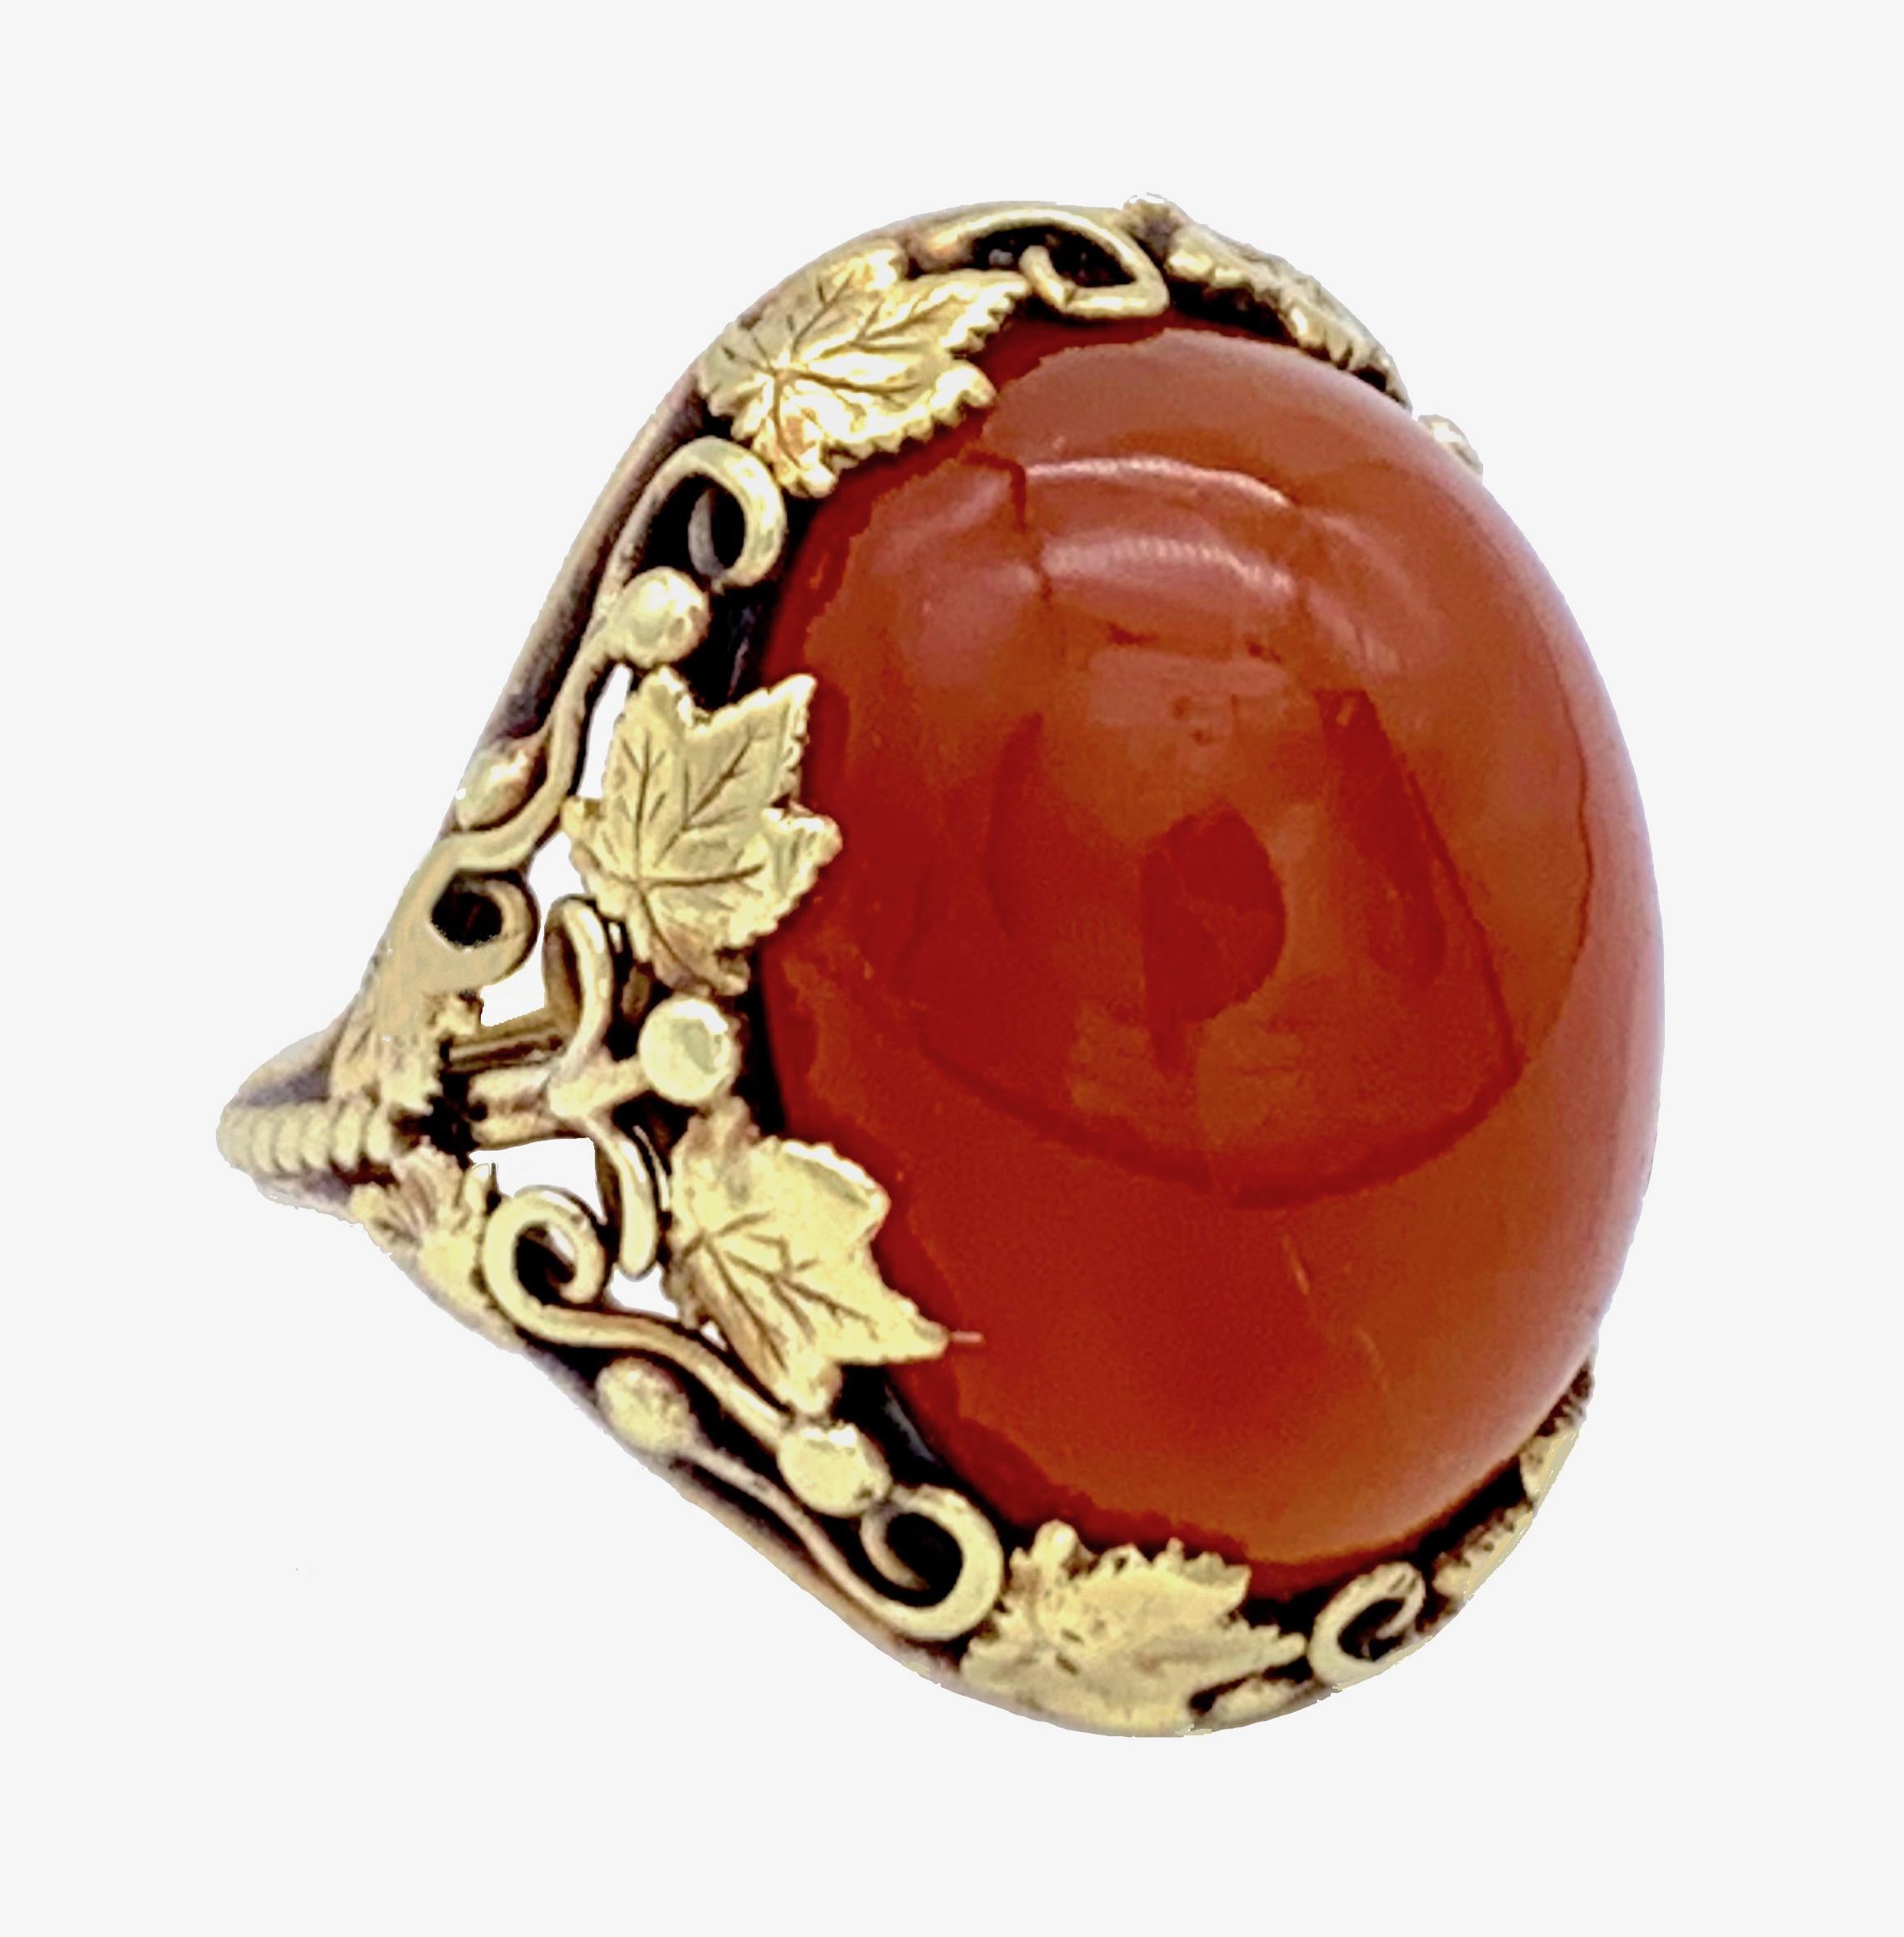 This elegant Art Nouveau Ring has an oval carnelian cabochon mounted in a setting made out of vine and vine  leaves handcrafted out of 14 karat gold in 1900ca. The shank is decorated with twisted goldwire.